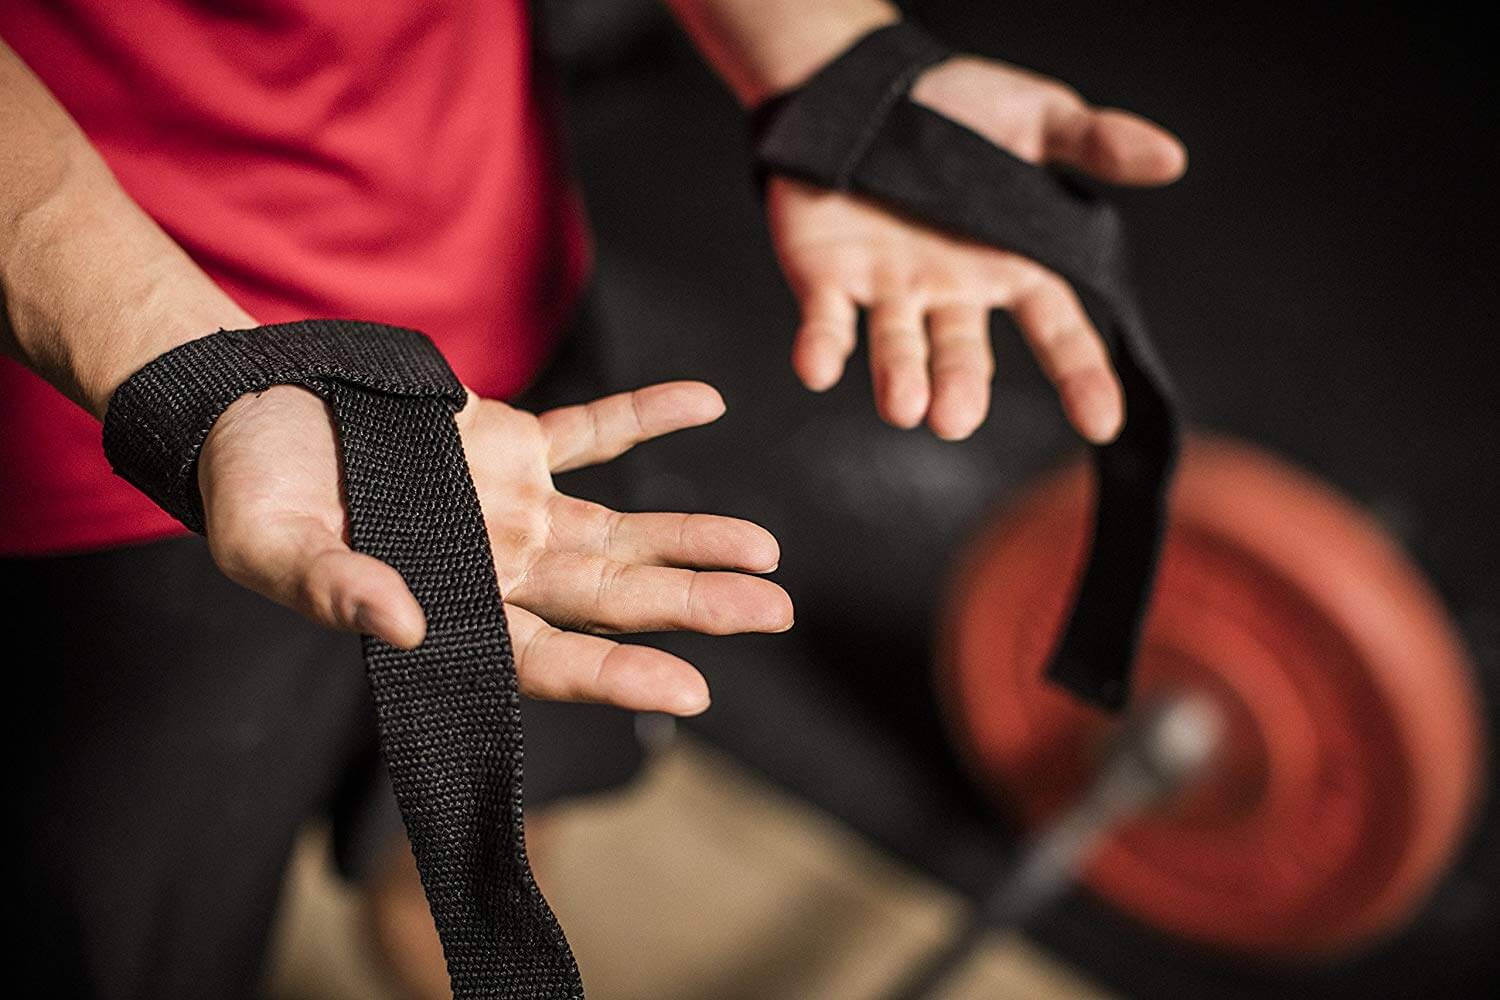 How to wear figure 8 lifting straps?